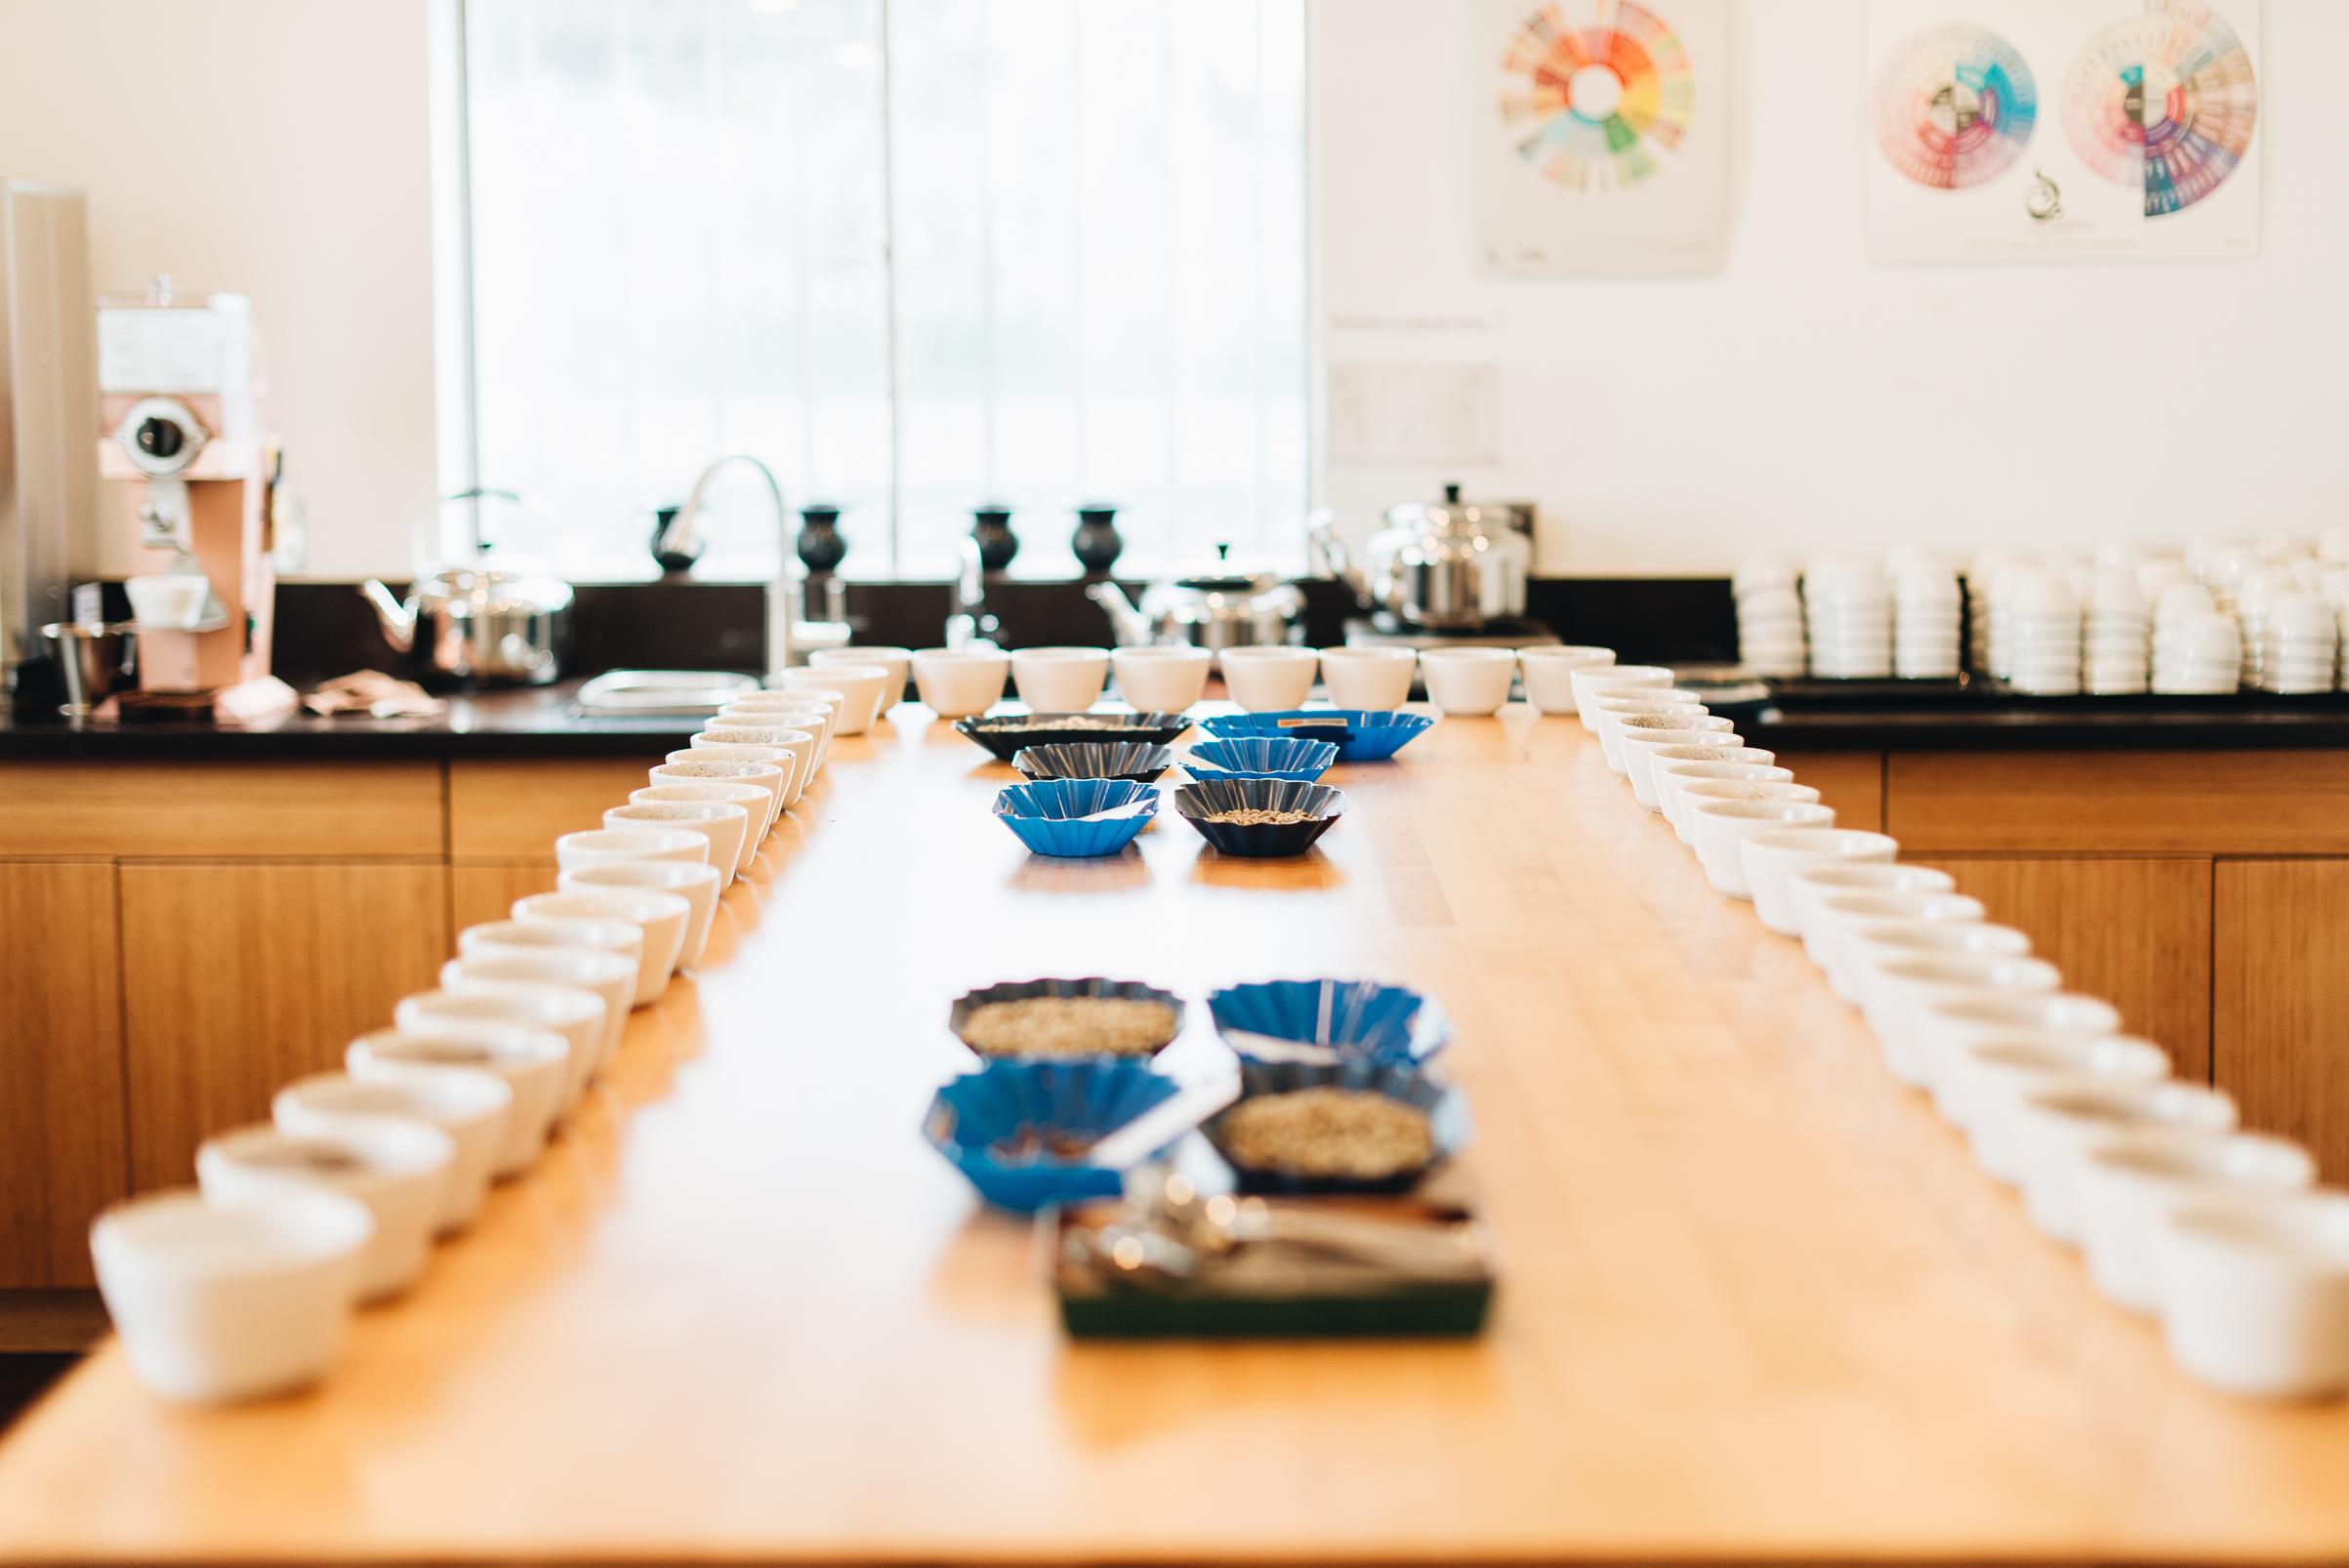 Introduction to Cupping at CoRo